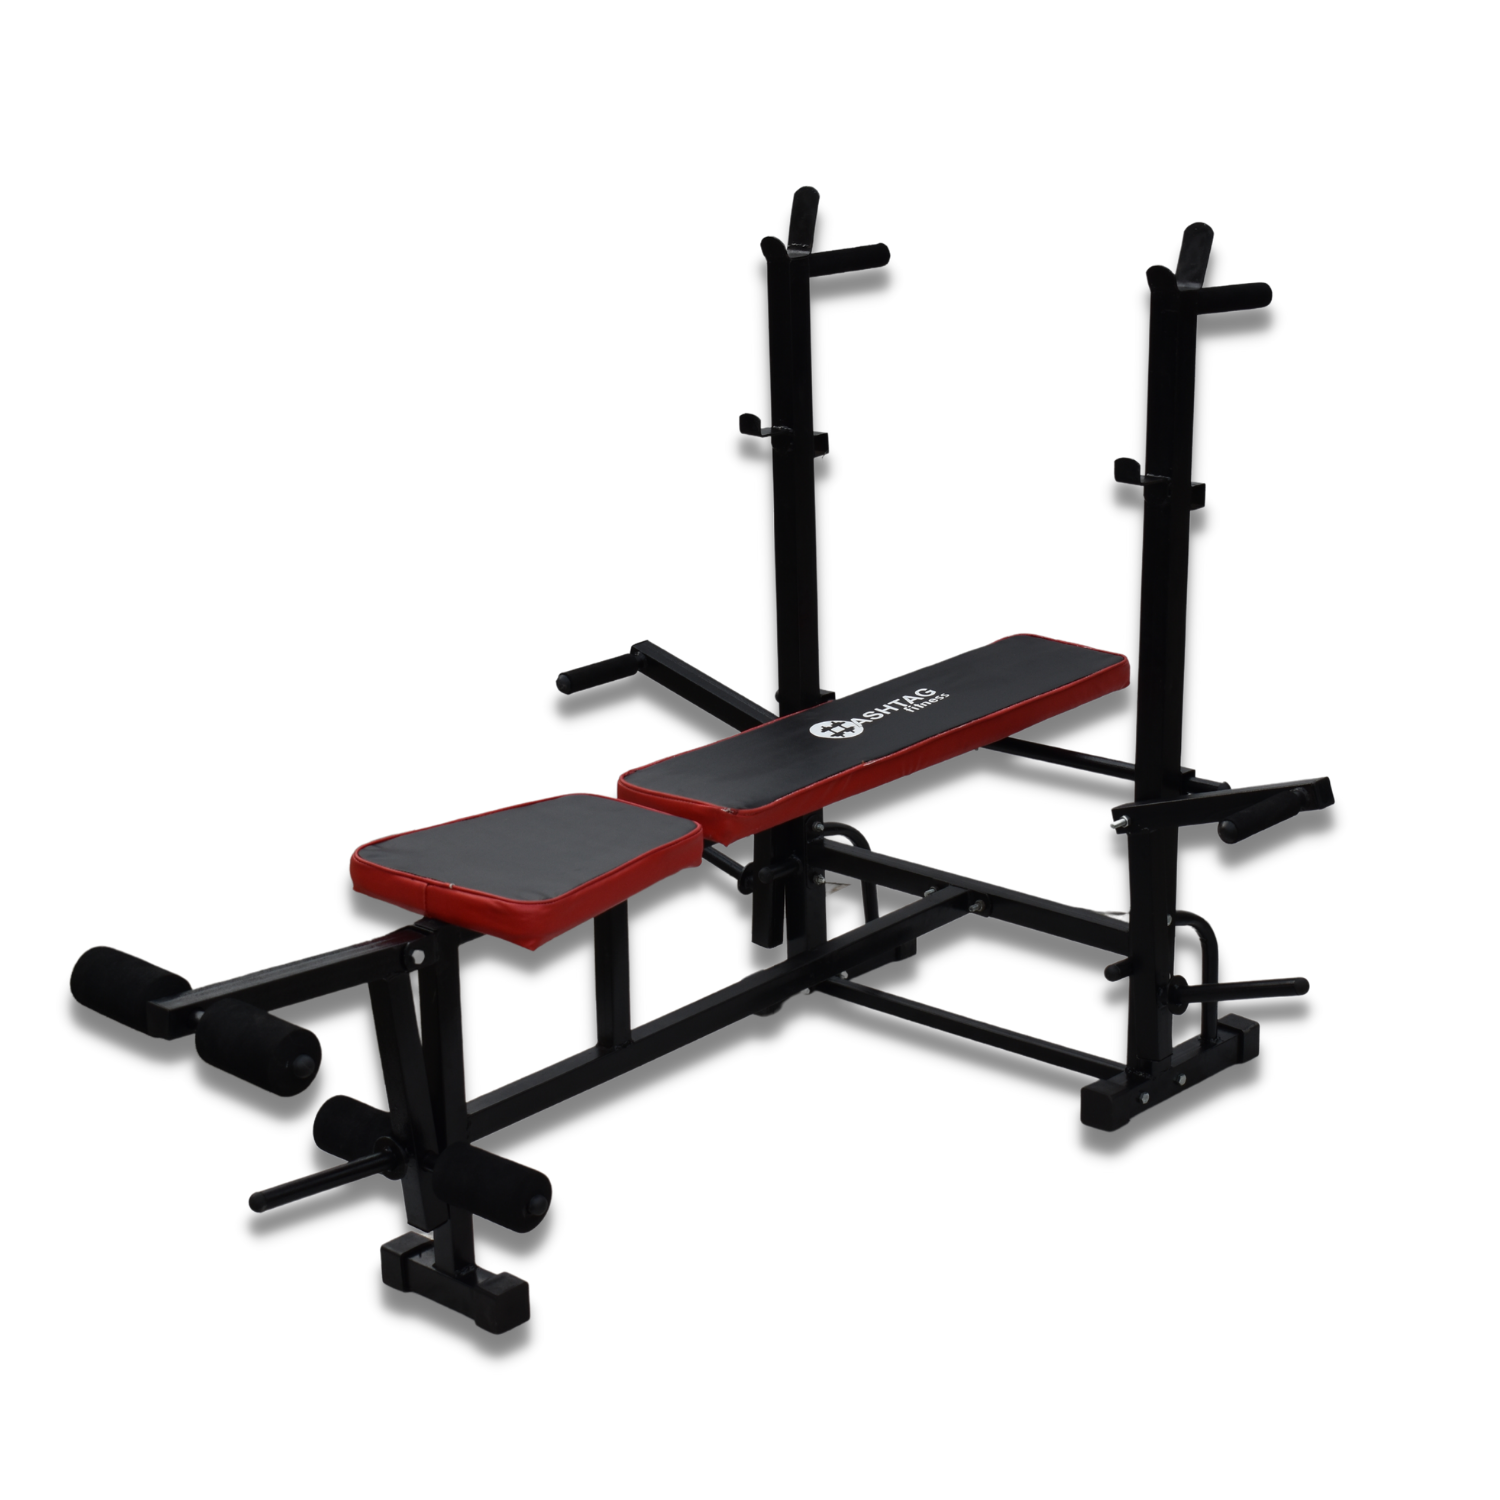 Hashtag Fitness 8in1 multi-purpose & chest press home gym bench